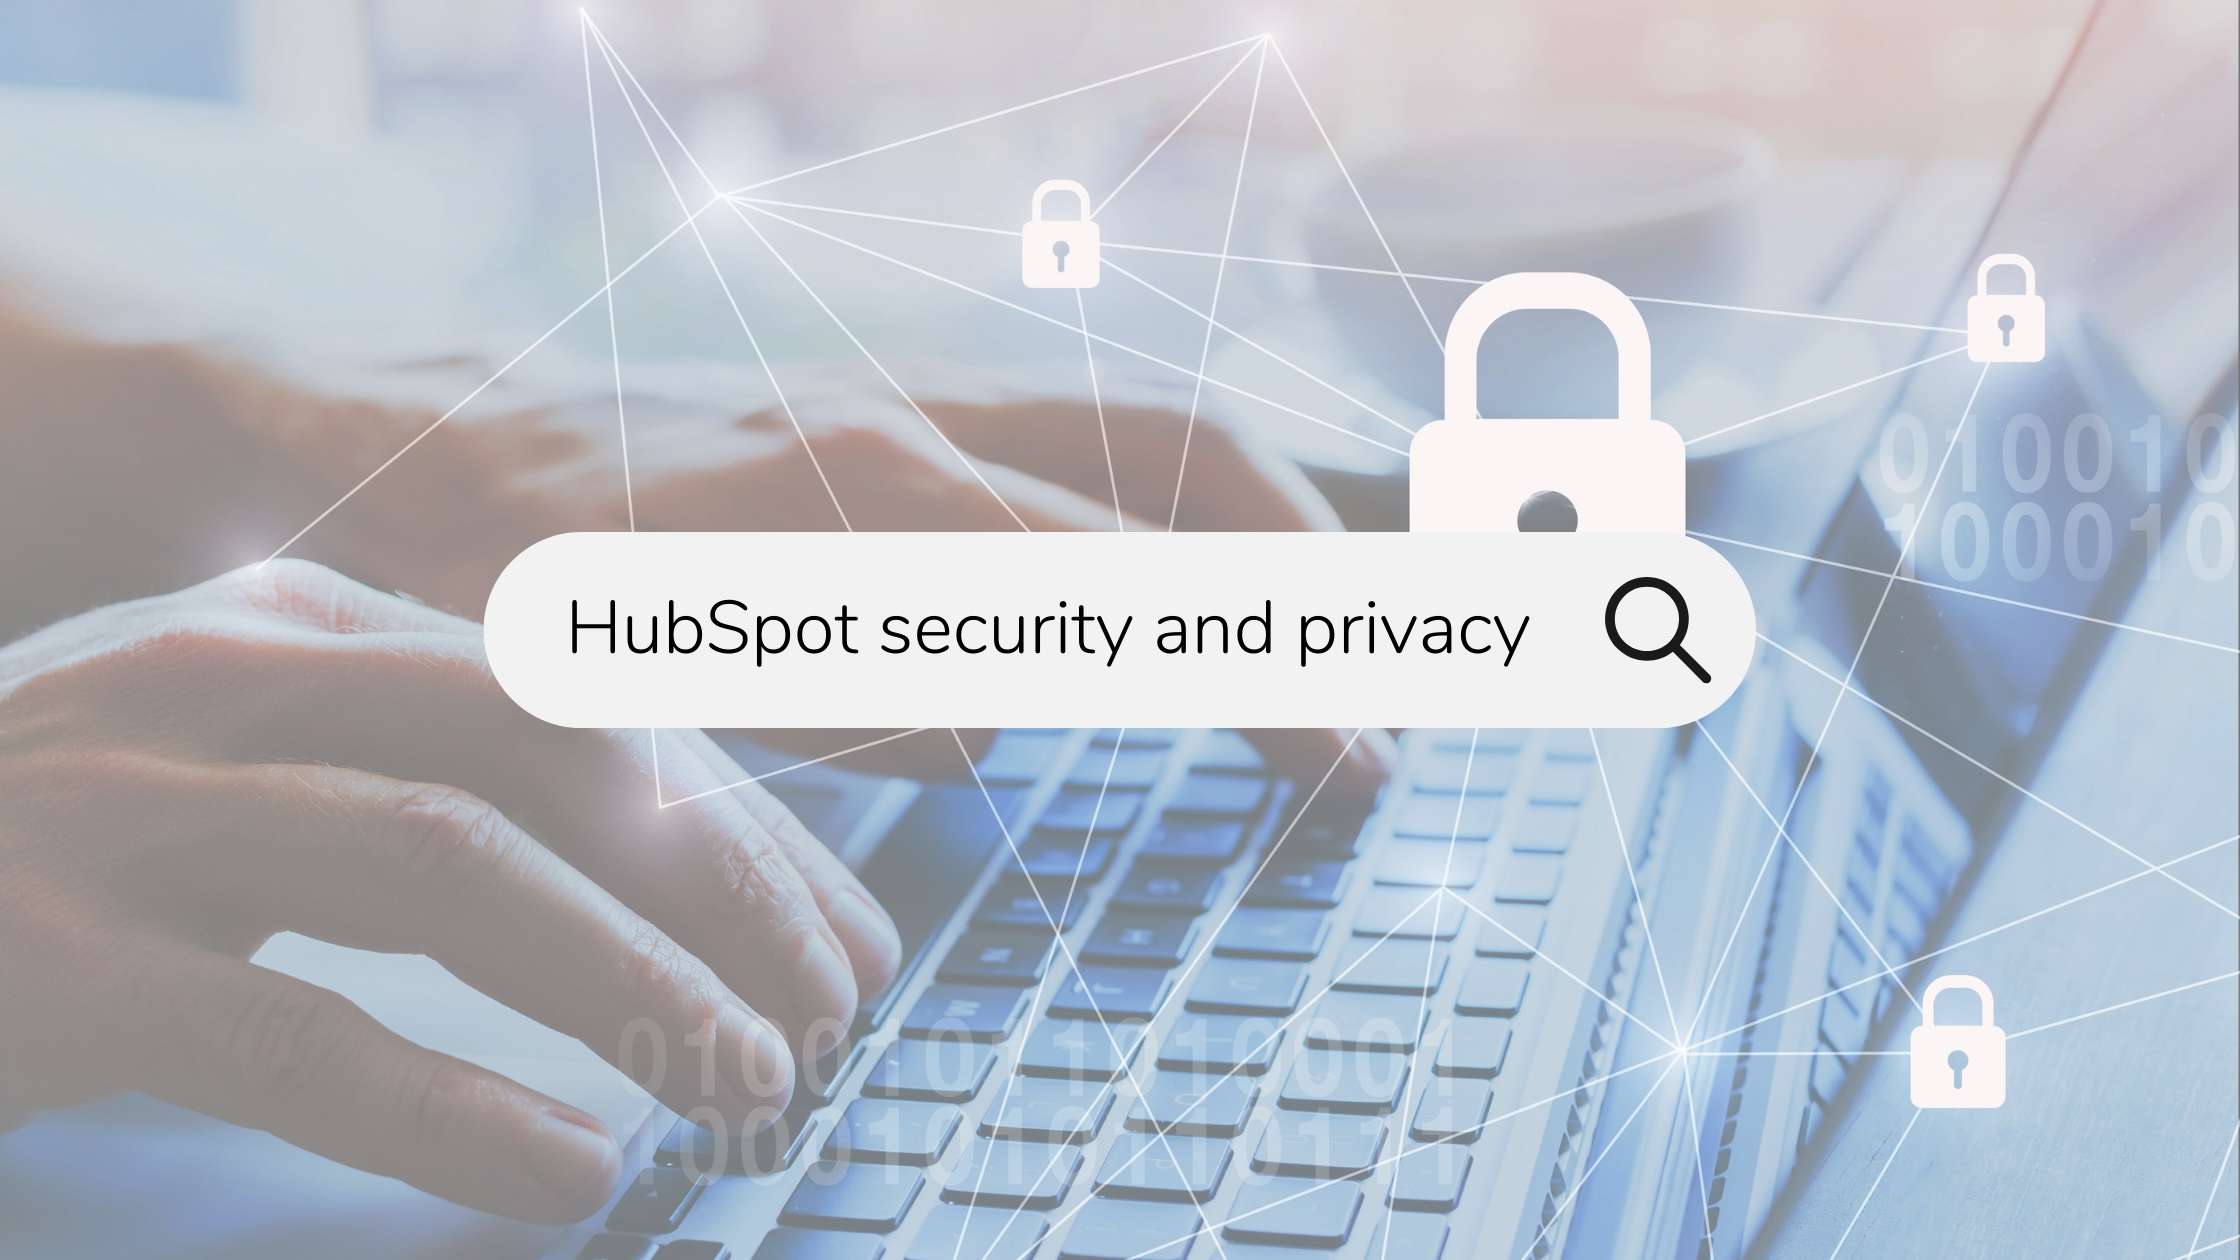 Search bar with 'HubSpot security and privacy' written within it